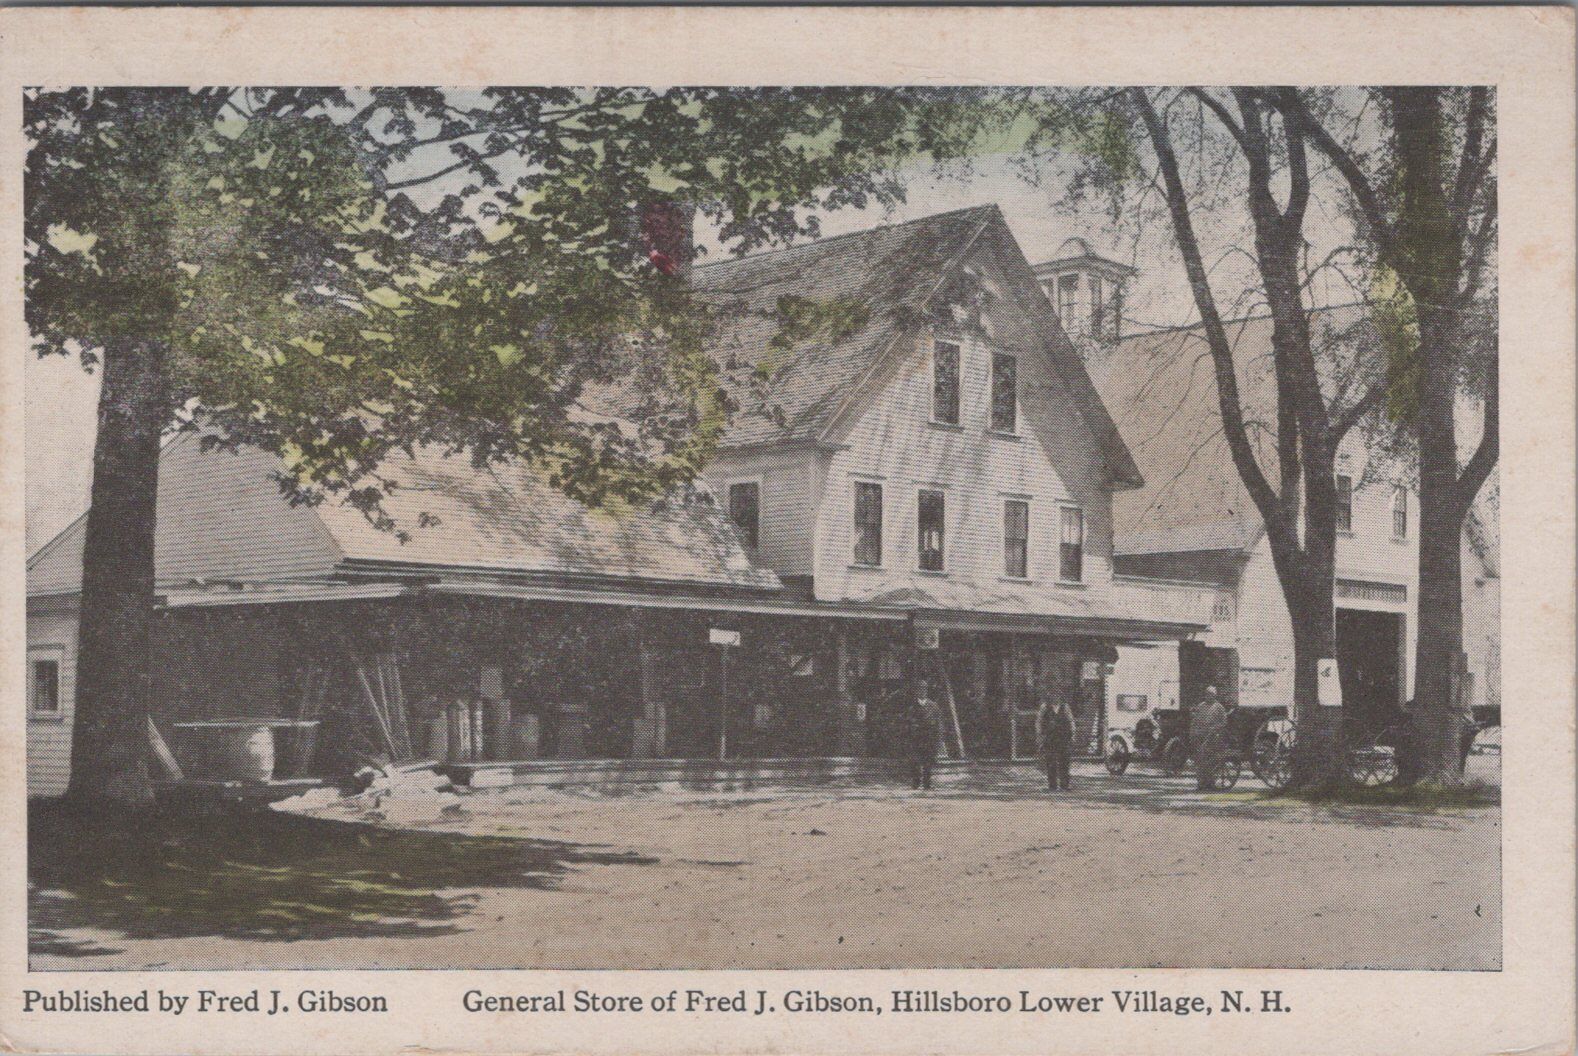 General Store of Fred J. Gibson Hillsboro Lower Village New Hampshire Postcard